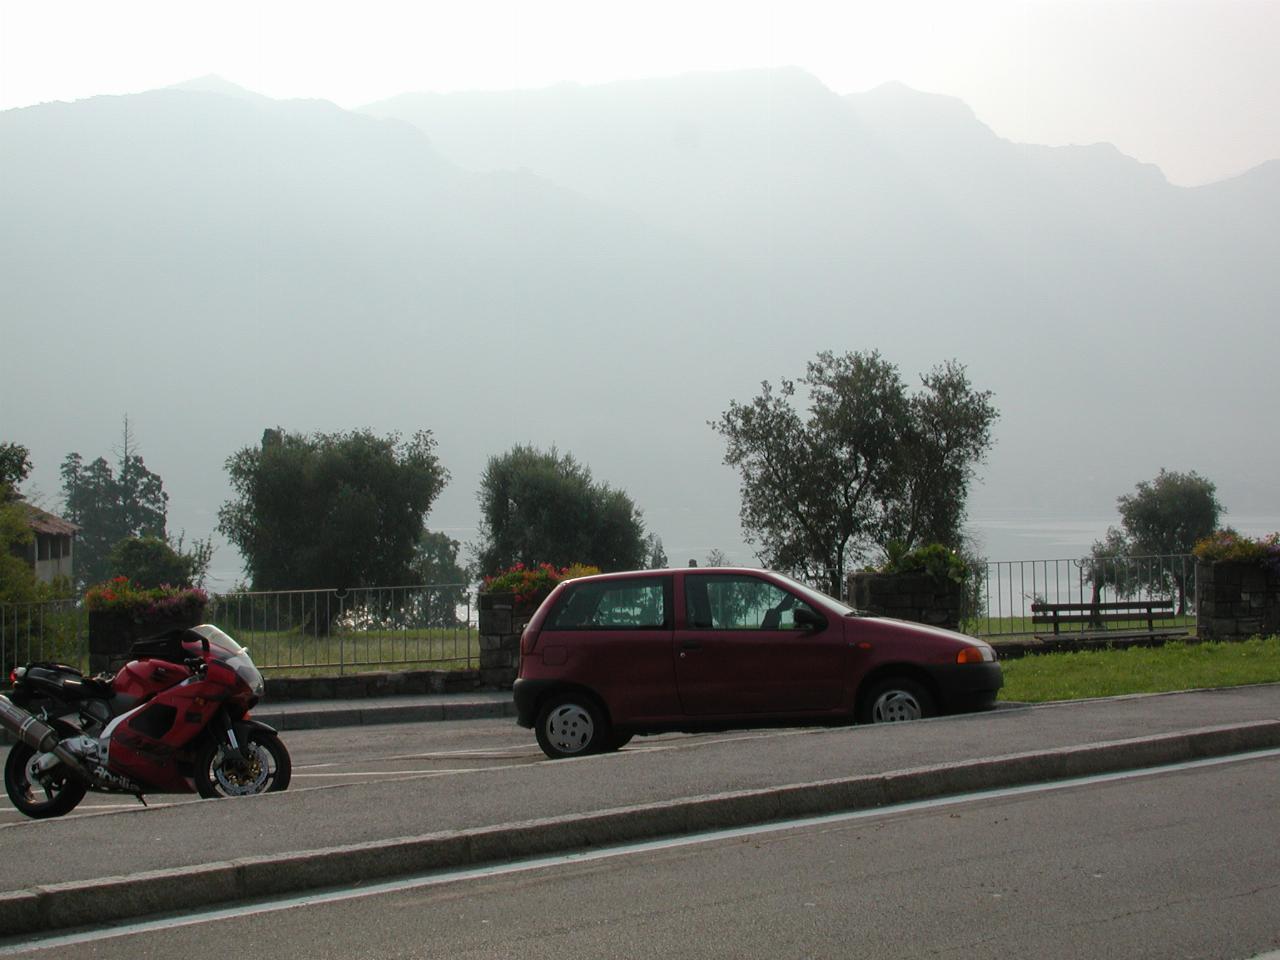 Looking across Lake Lecco from Bellagio